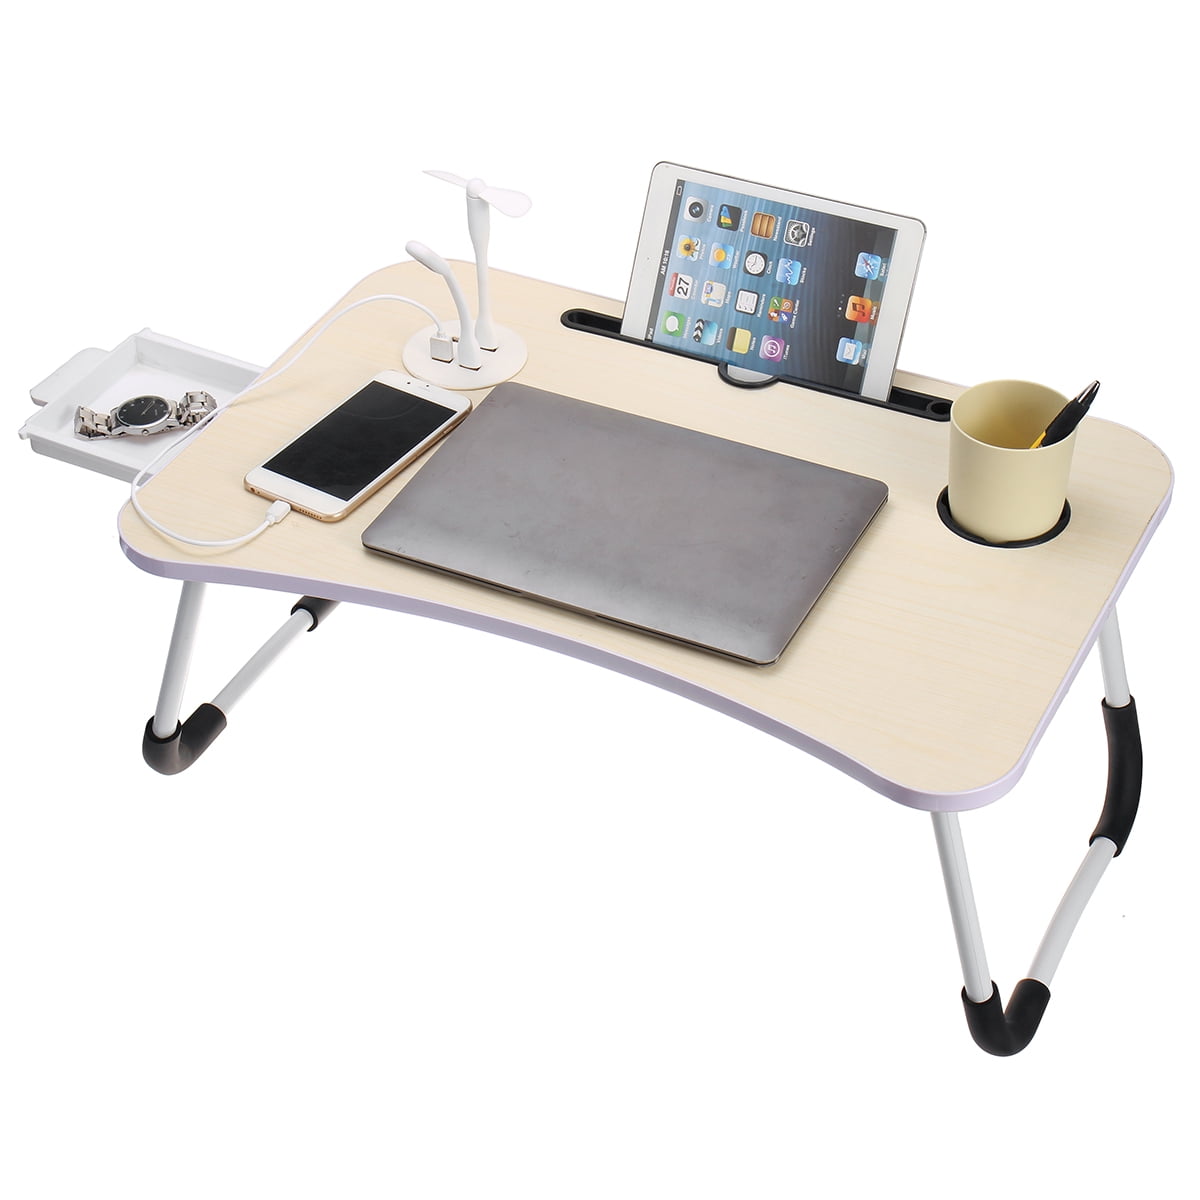 Laptop Bed Tray Table Portable Lap Desk Notebook Breakfast Tray Cup Slot Holder 